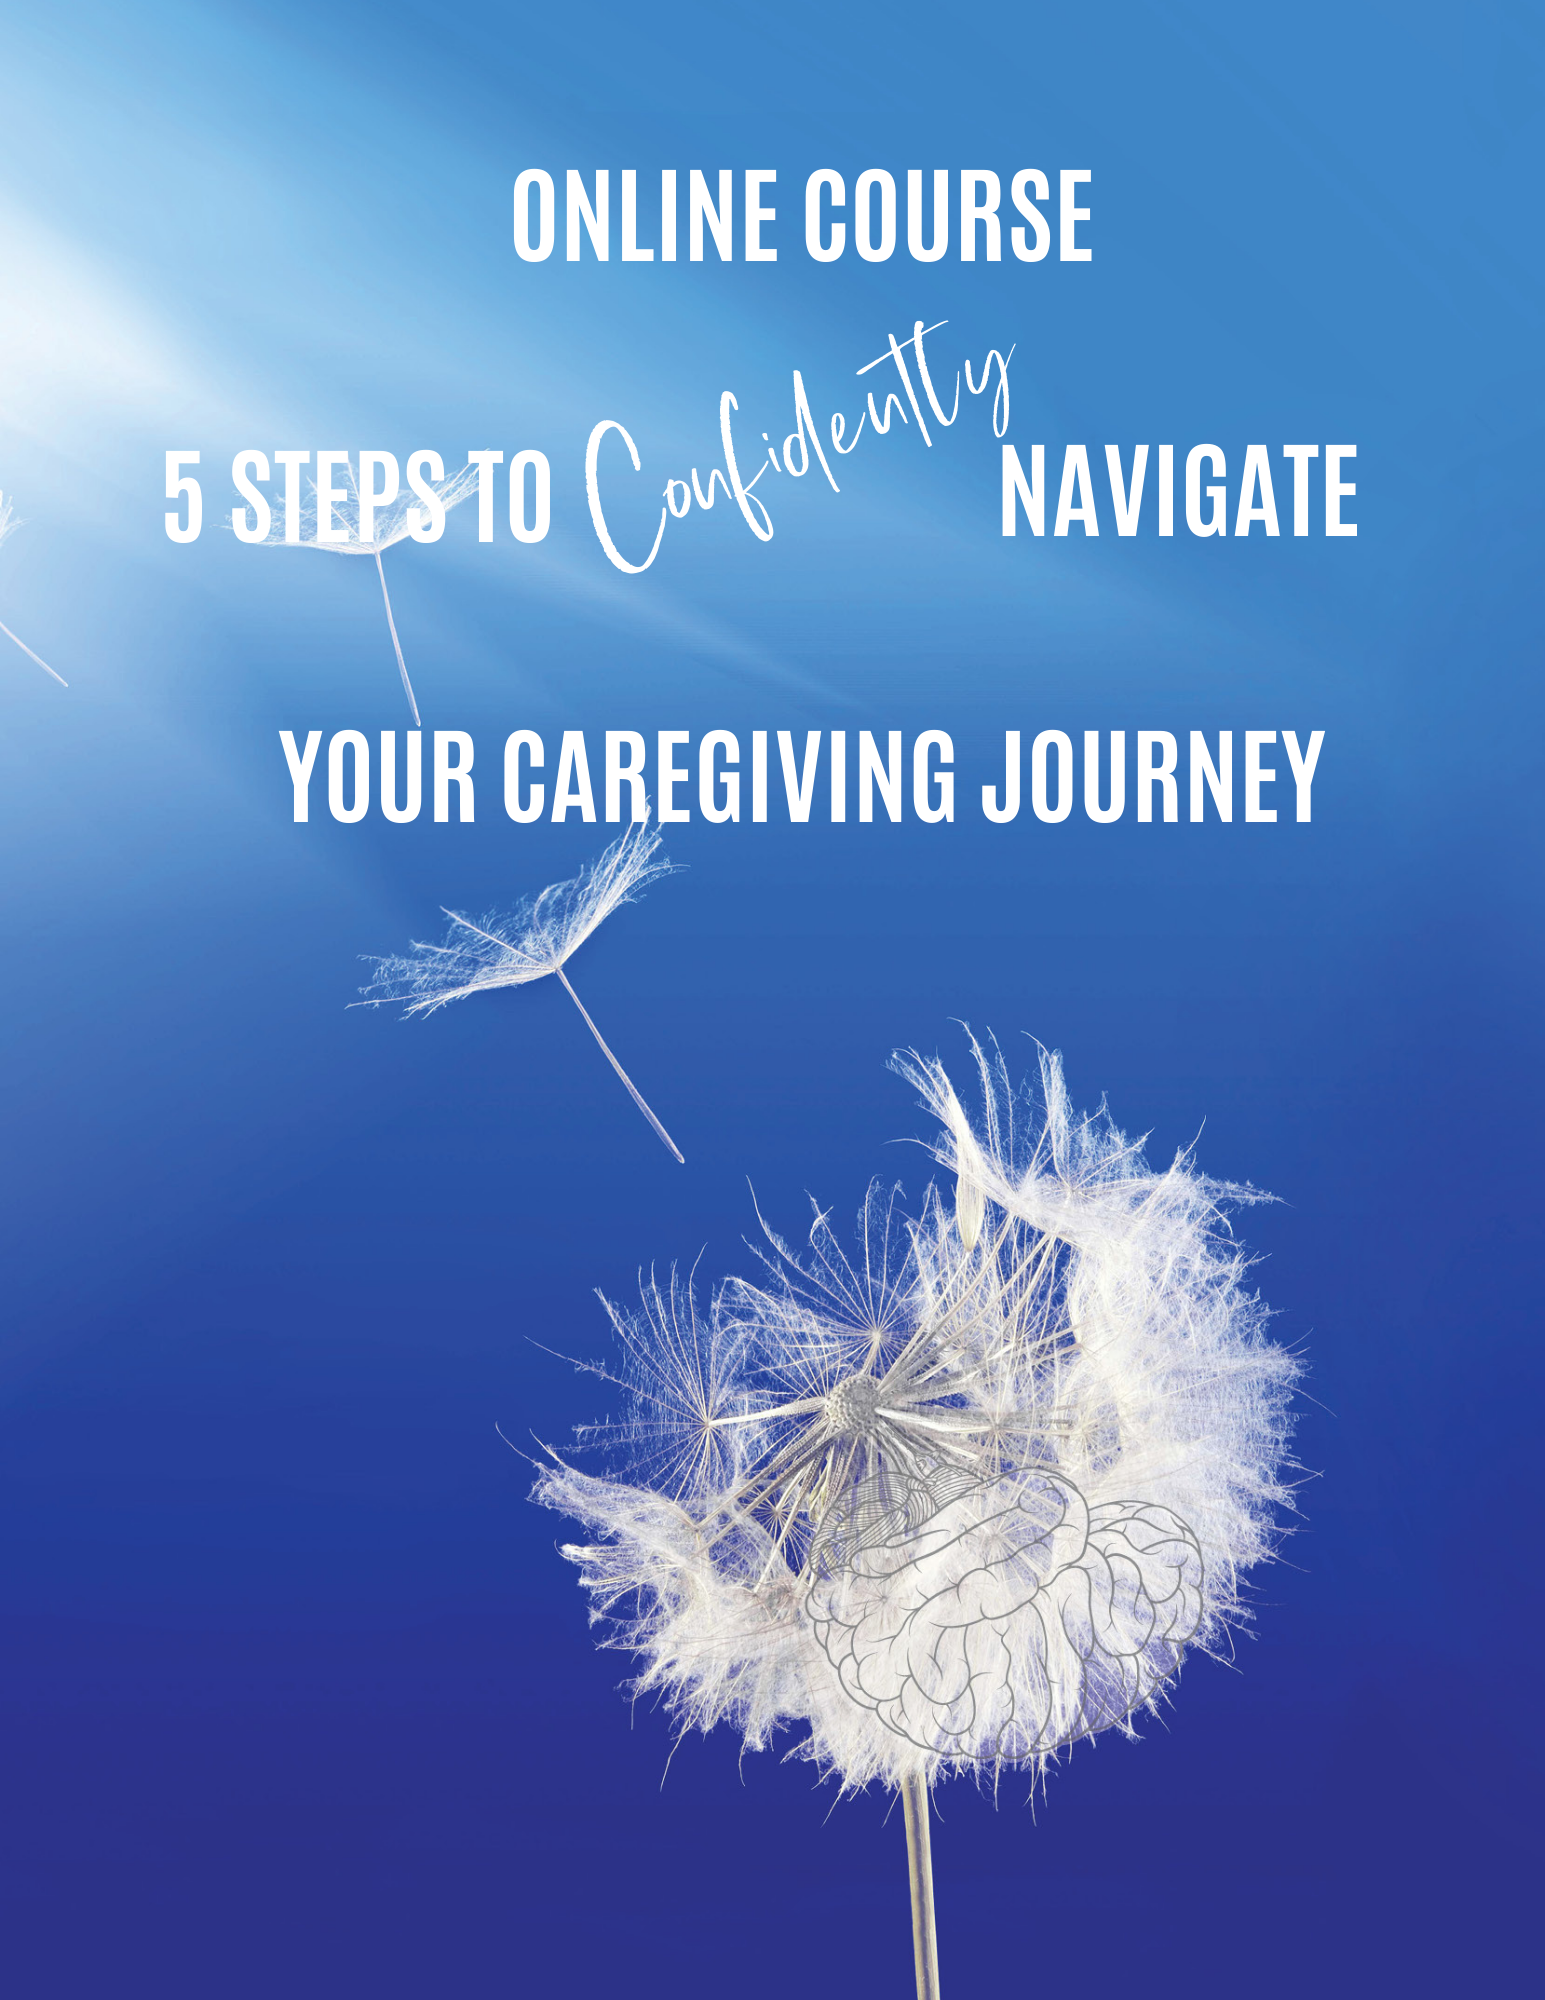 5 Steps to Confidently Navigate Your Caregiving Journey Online Course